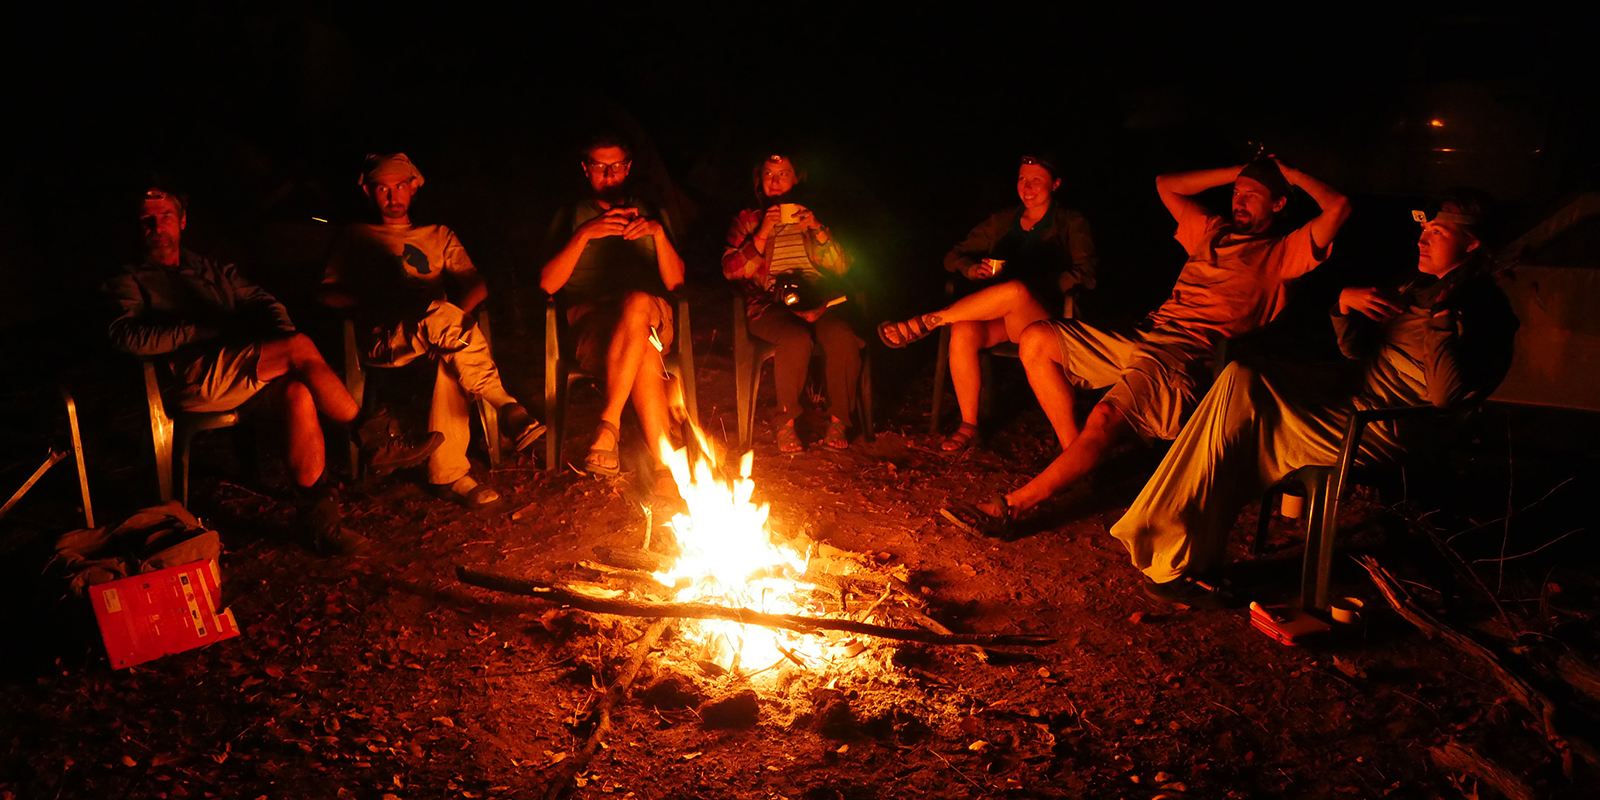 The group sitting around a campfire at night